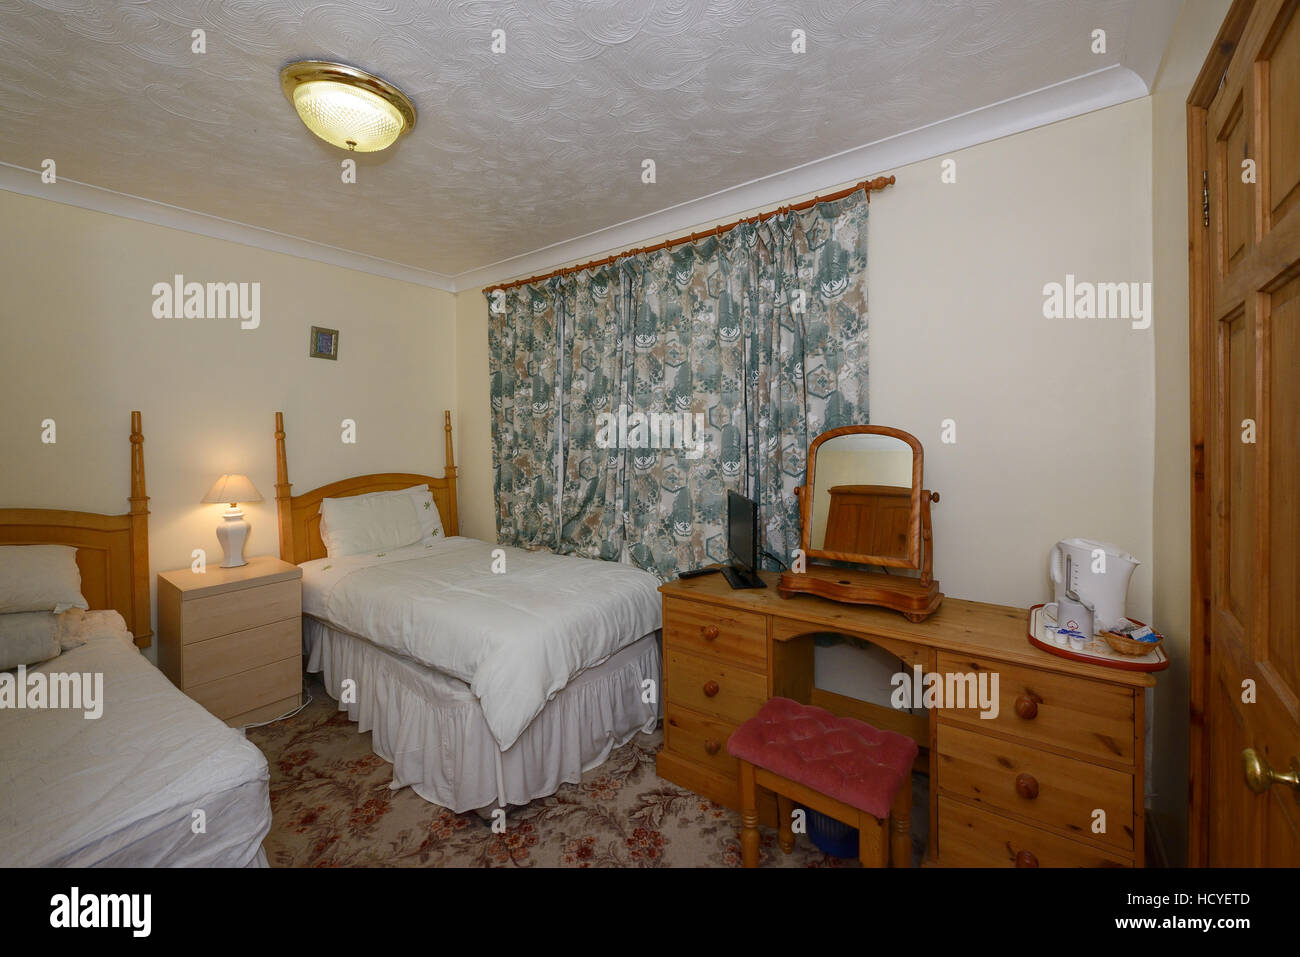 A budget bed and breakfast bedroom in the UK Stock Photo